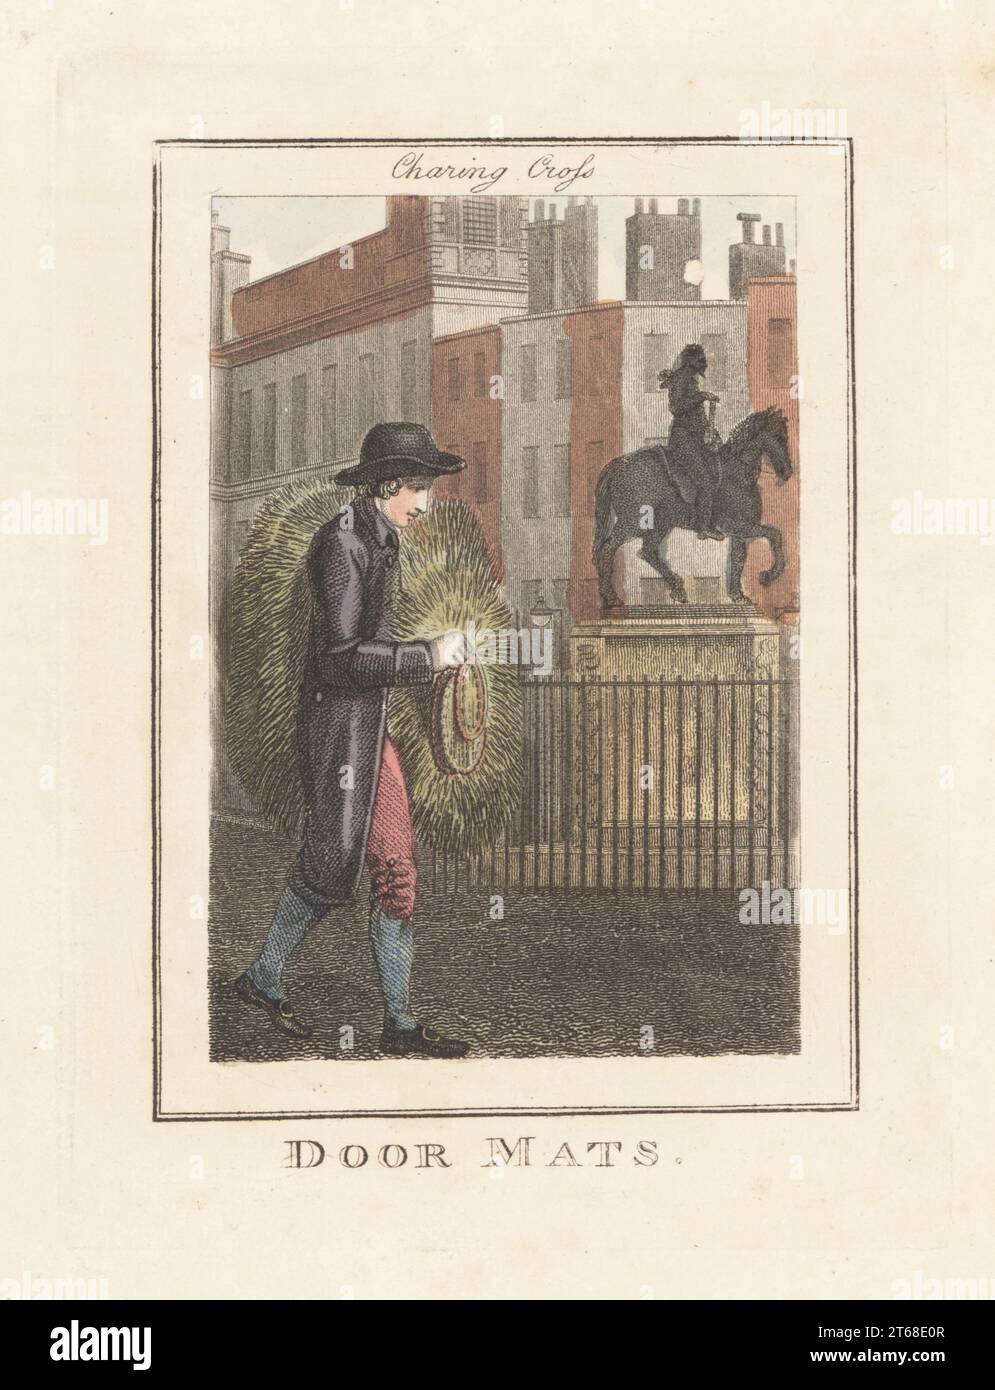 Door-mat seller in front of King Charles I equestrian statue, Charling Cross. Man in hat, coat, breeches and buckle shoes, selling rush and rope mats. Handcoloured copperplate engraving by Edward Edwards after an illustration by William Marshall Craig from Description of the Plates Representing the Itinerant Traders of London, Richard Phillips, No. 71 St Pauls Churchyard, London, 1805. Stock Photo